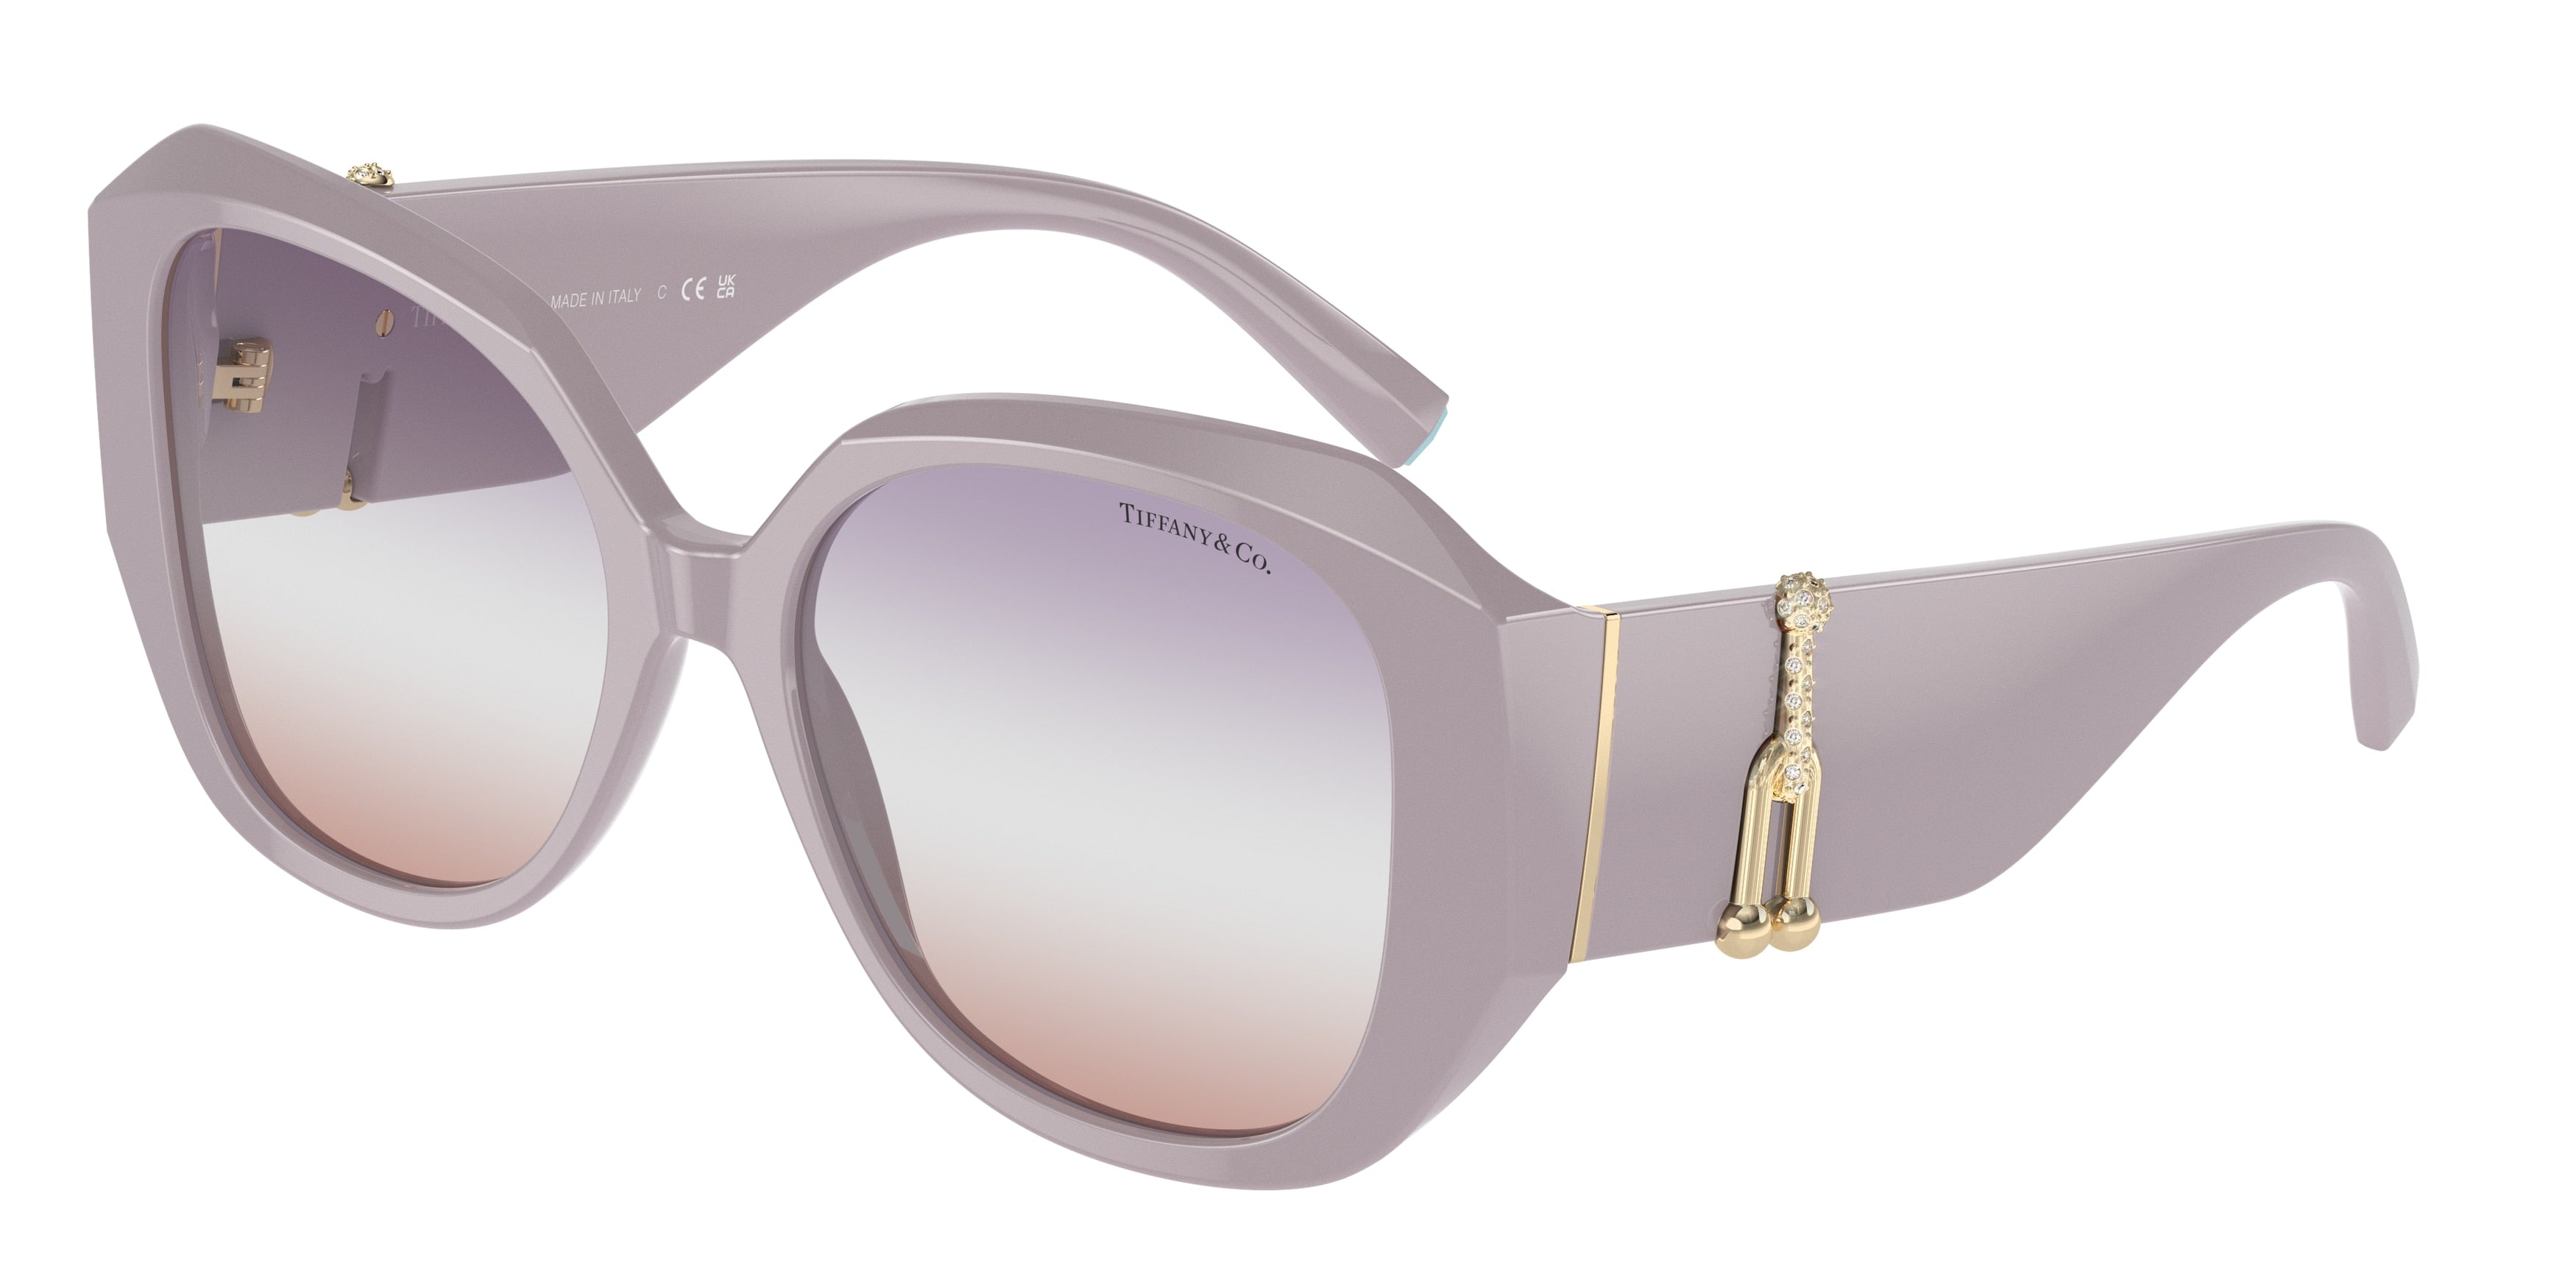 Tiffany TF4207BF Square Sunglasses  8381EL-Orchid Ice 55-140-17 - Color Map Violet